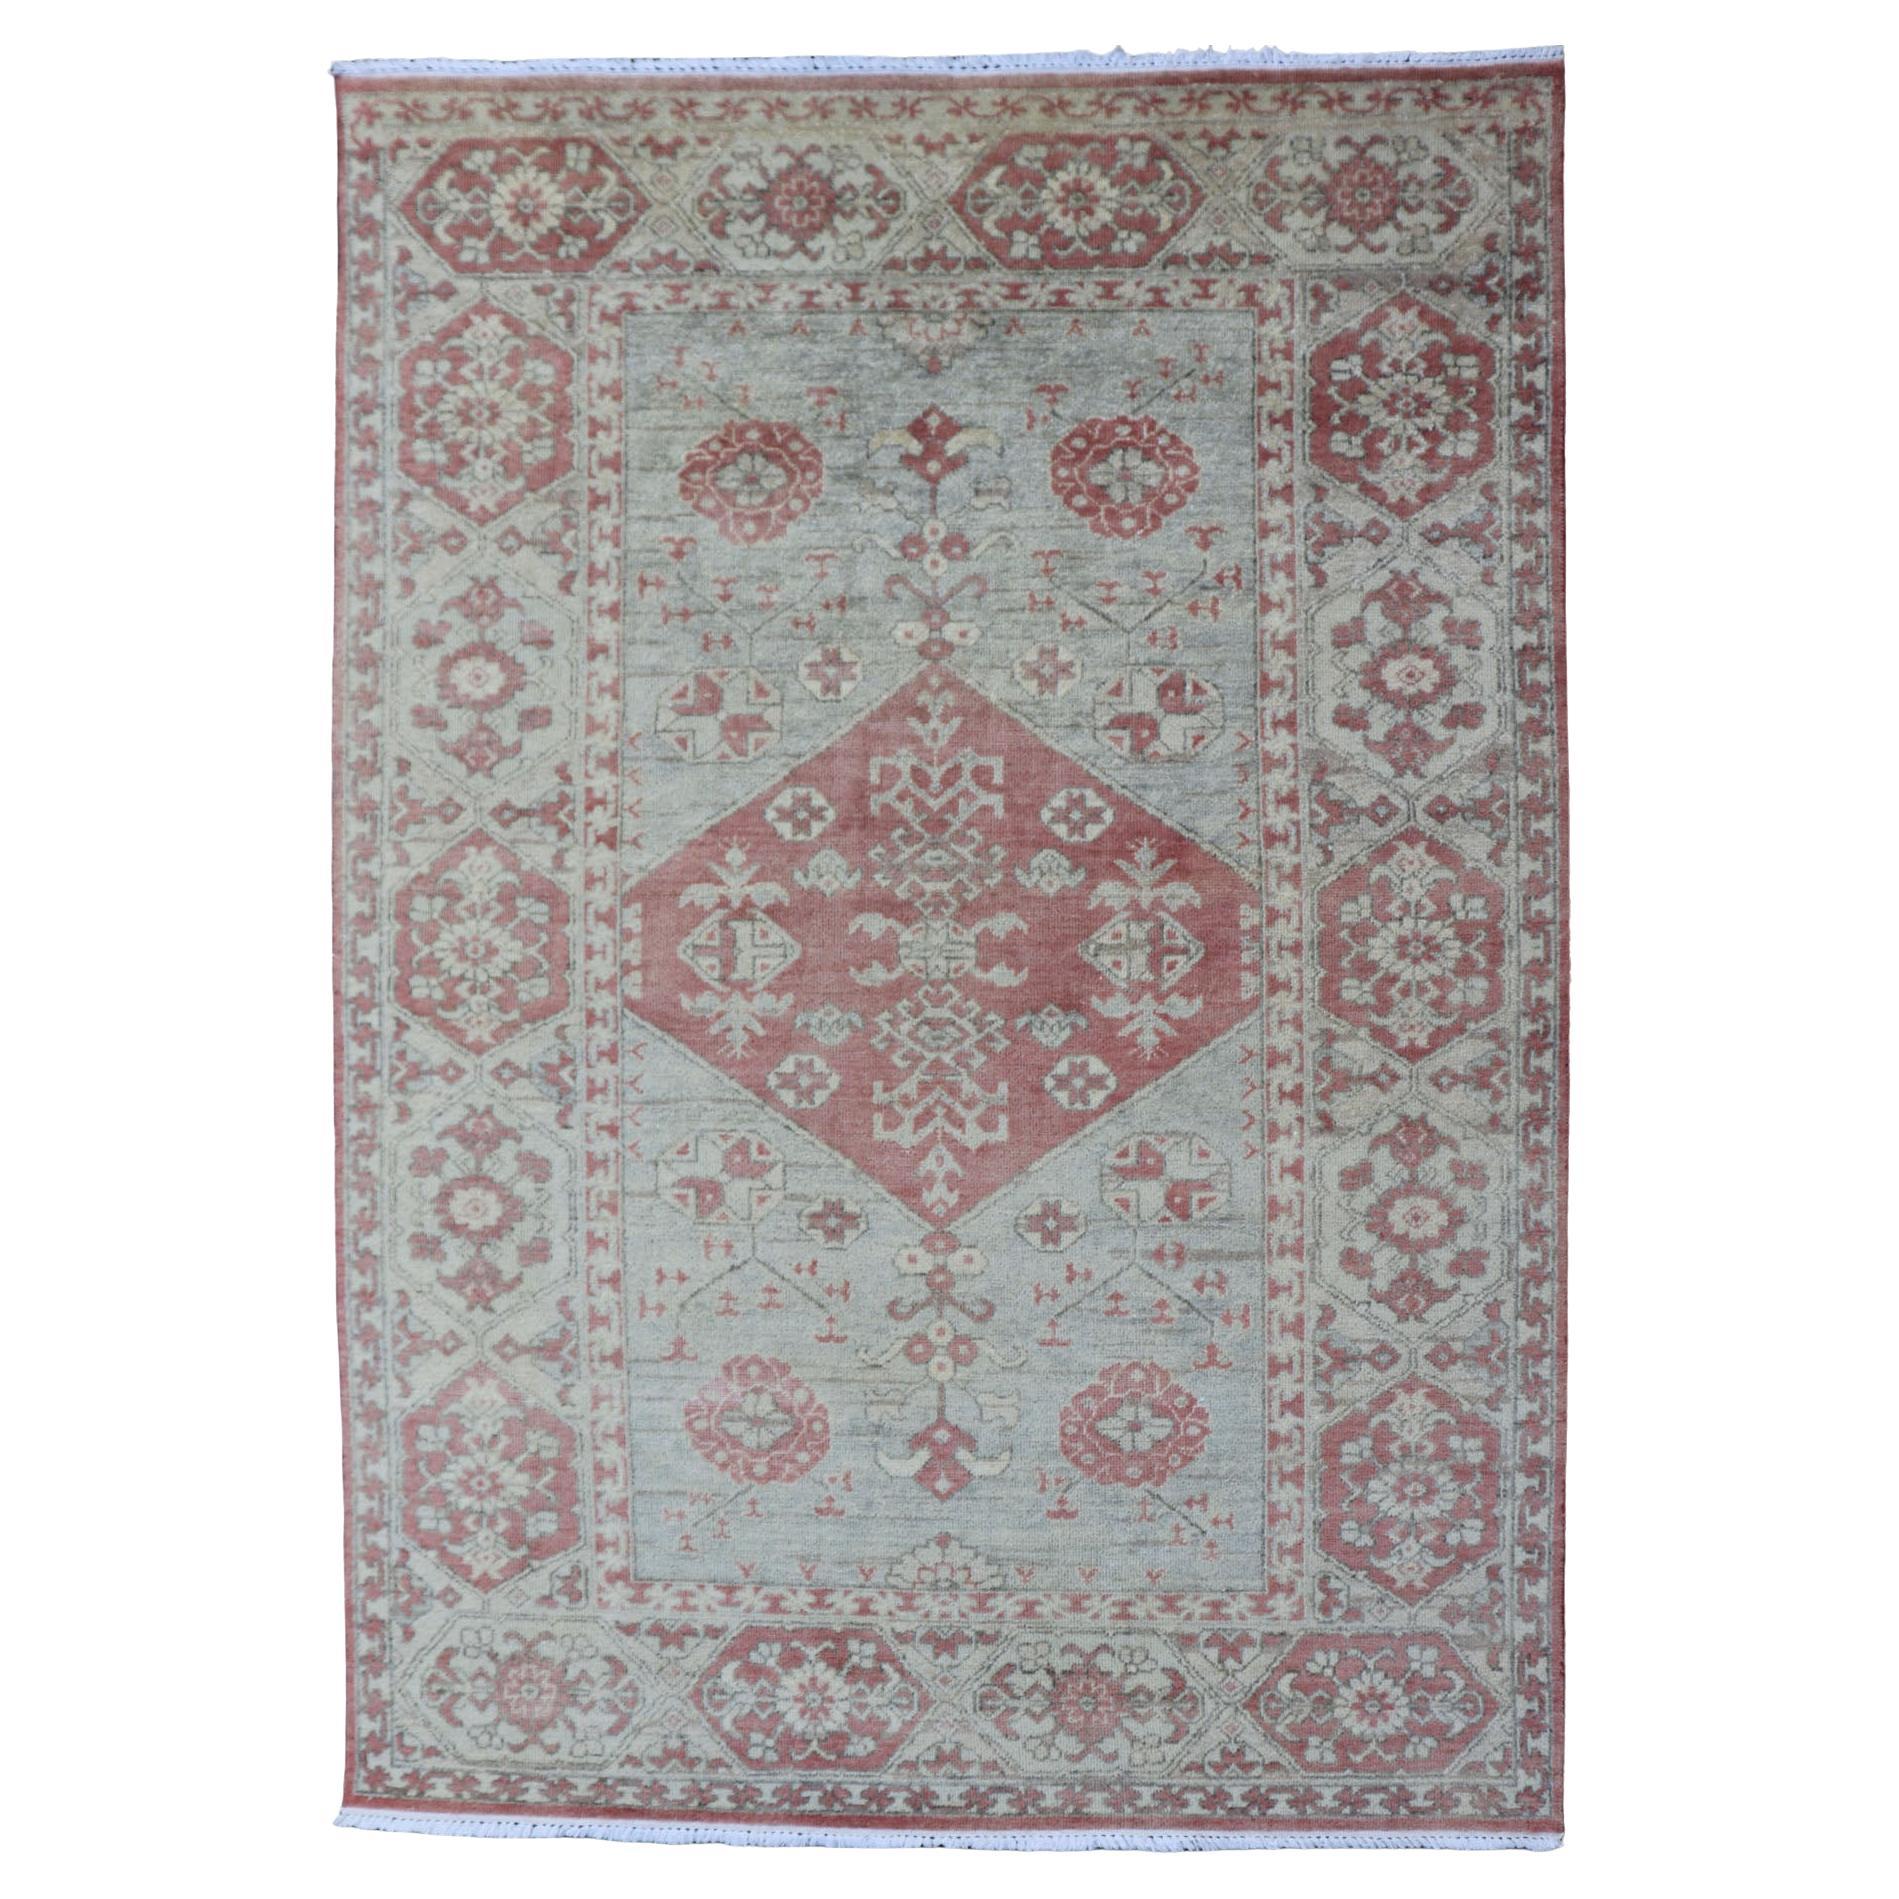 Keivan Woven Arts Oushak Rug in Light Blue and Coral   5'10 x 8'10 For Sale